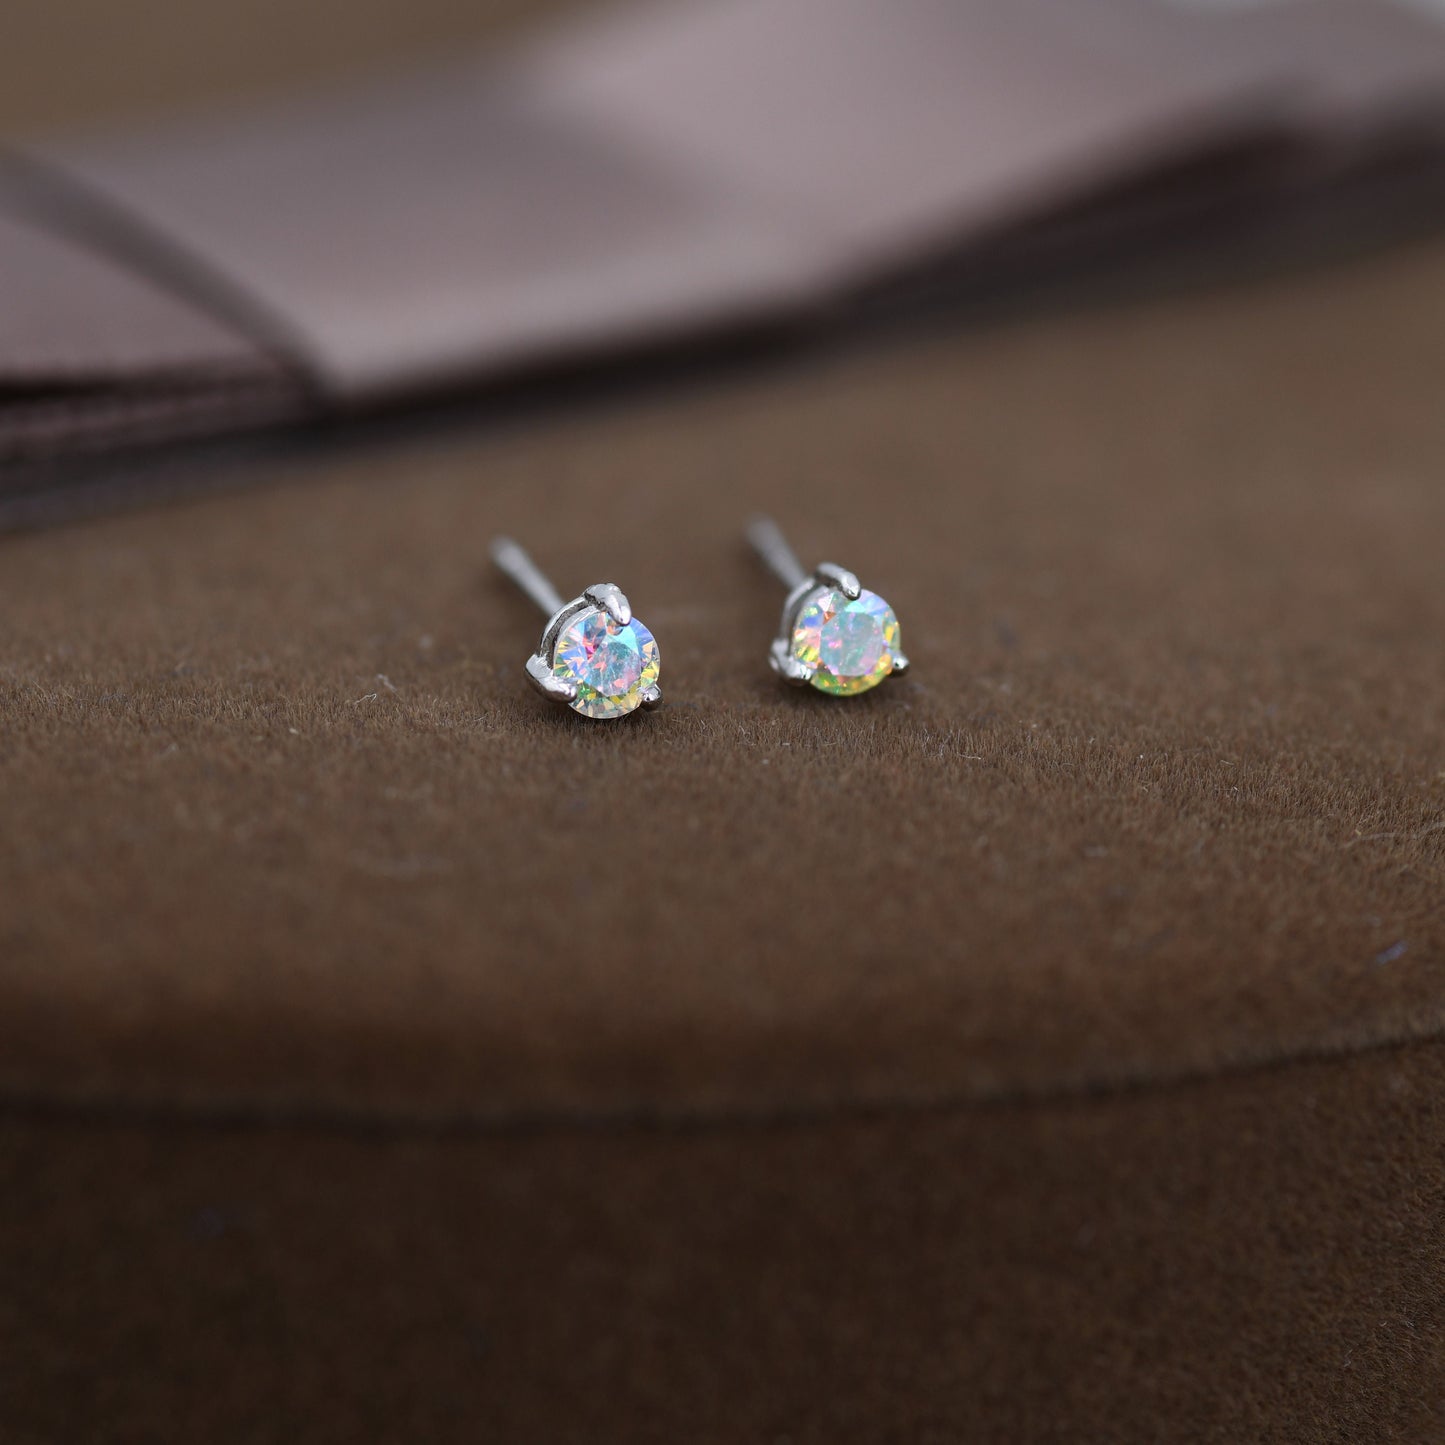 Aurora AB Crystal Tiny CZ Stud Earrings in Sterling Silver, 3mm Colour Changing Crystals, Extra Small